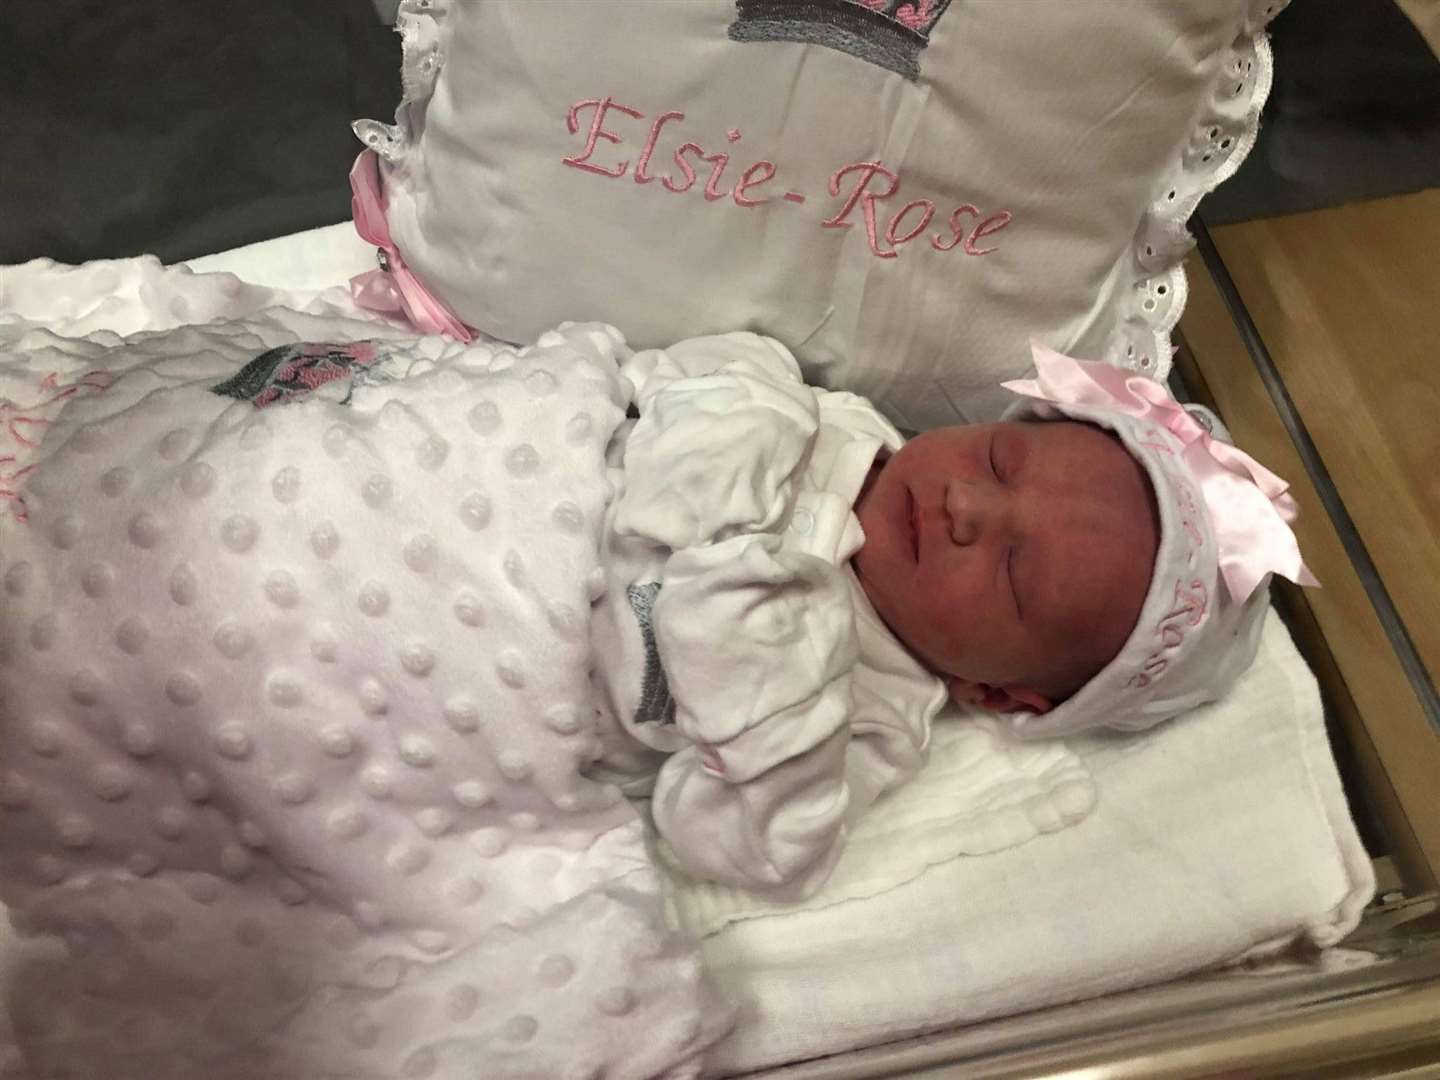 At two weeks old, Elsie-Rose contracted a bad cold and suffered from respiratory problems